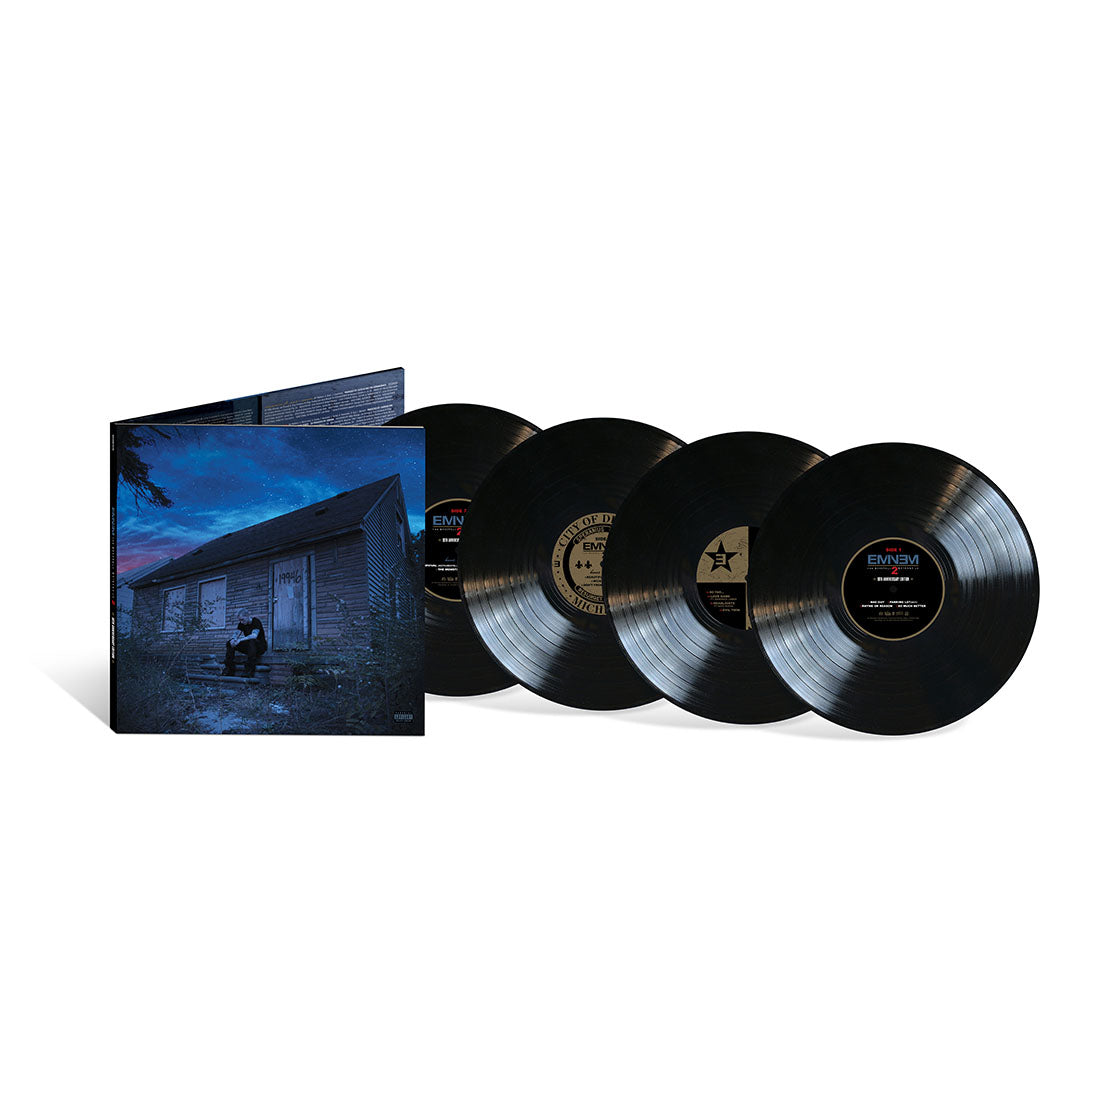 Eminem - Marshall Mathers LP 2 (10th Anniversary Edition): Deluxe 4LP